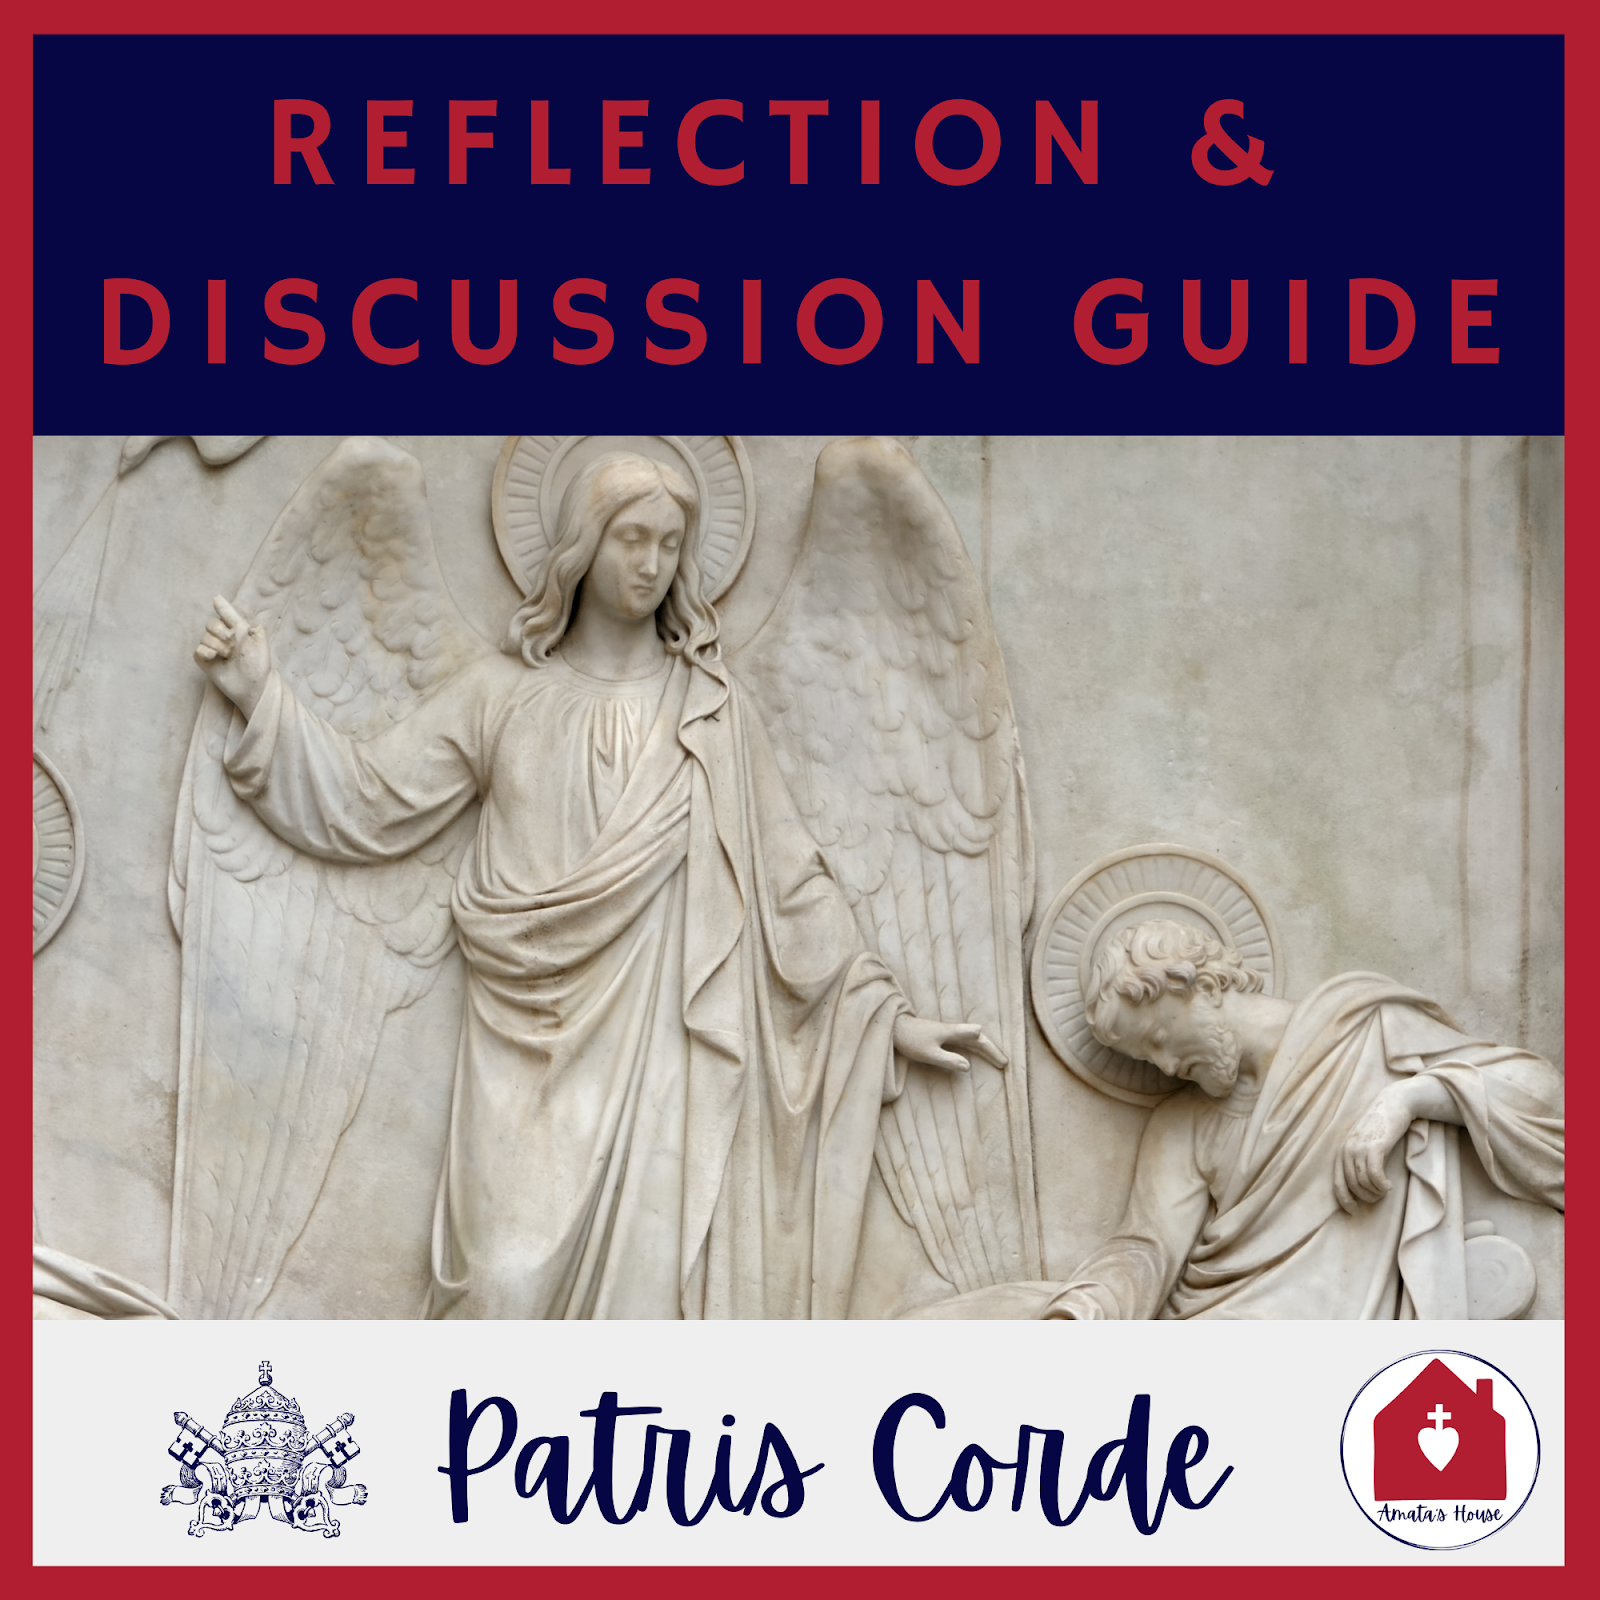 Reflection and Study Guide for Patris Corde available on Teachers Pay Teachers